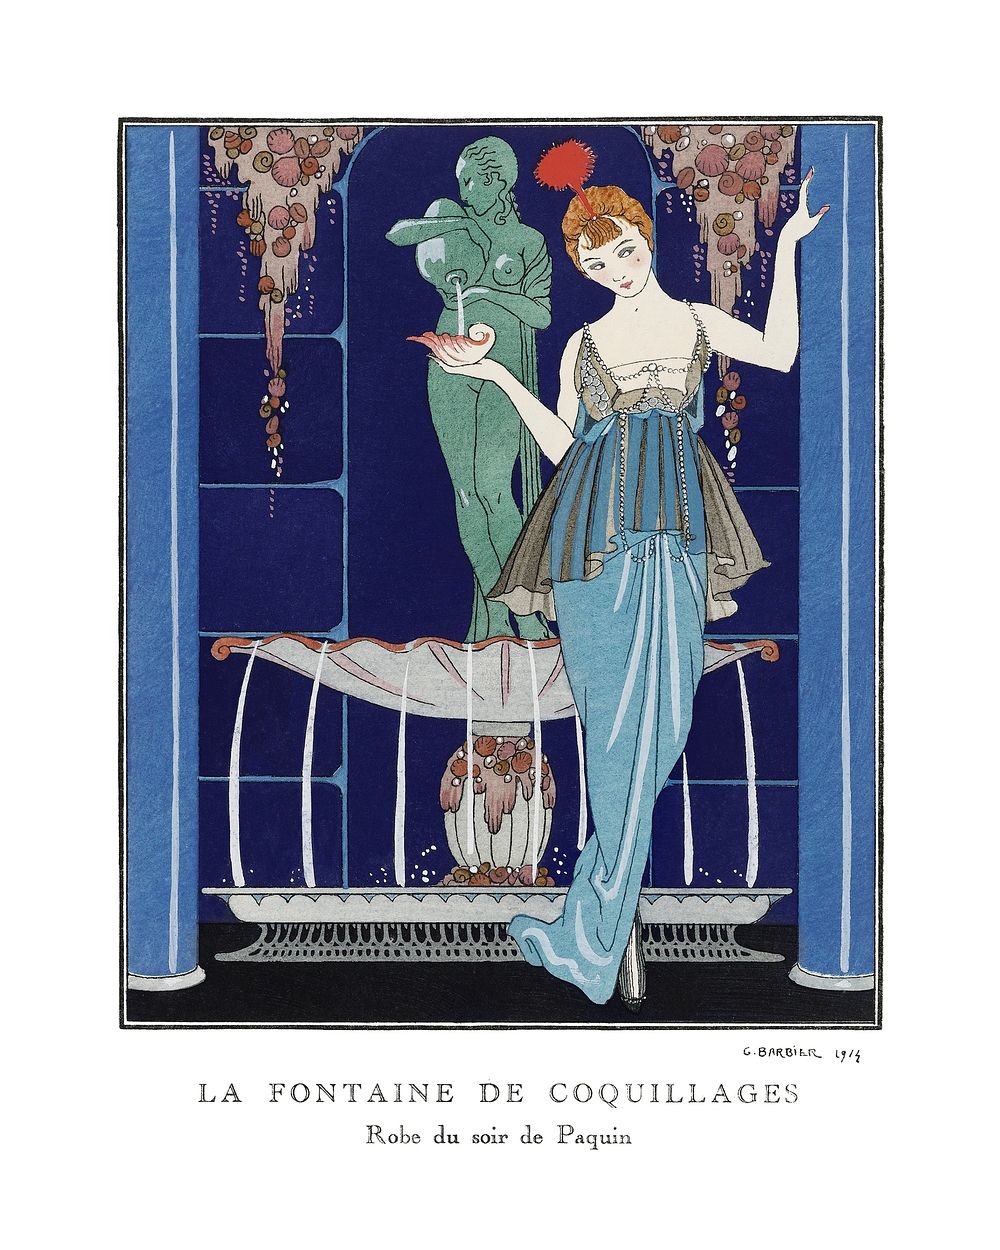 Flapper lady poster, art deco fashion illustration remix from the artwork of George Barbier